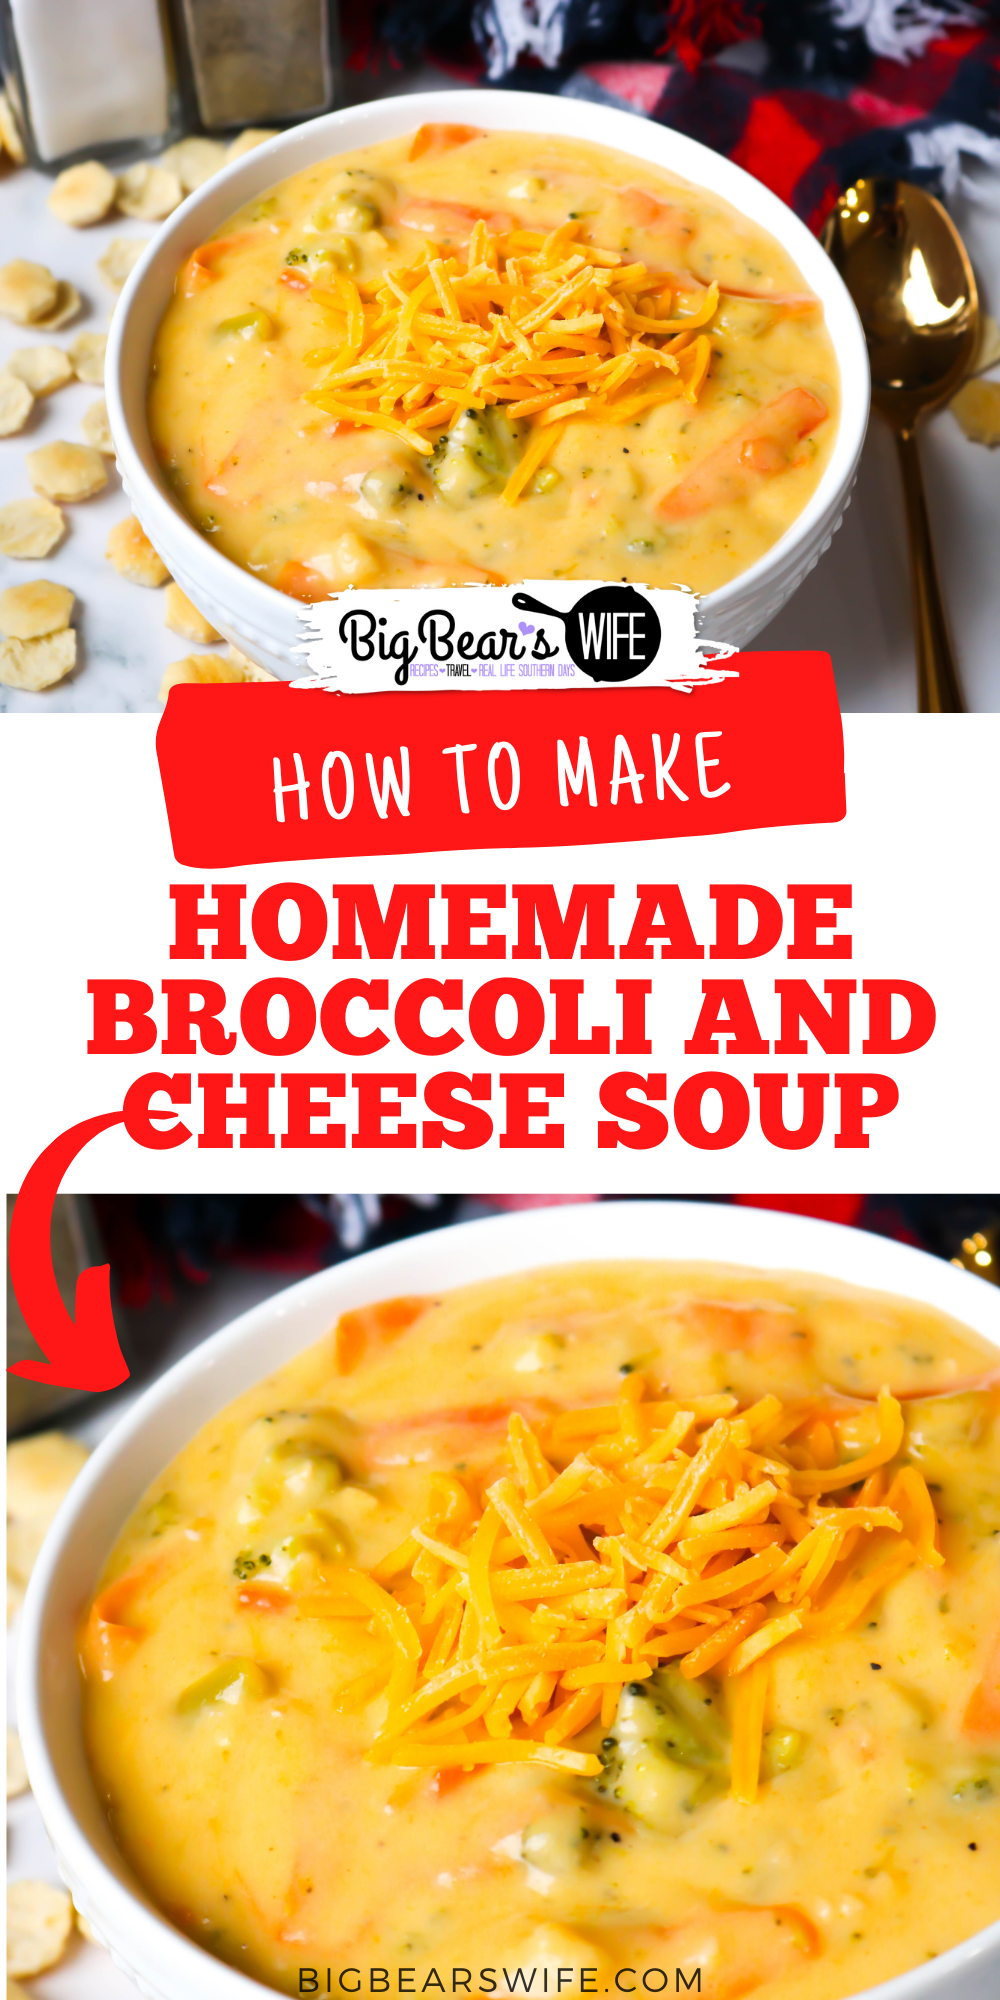 This Homemade Broccoli and Cheese Soup that is packed with broccoli, carrots, garlic and cheese is one of the best broccoli cheese soups I've made at home! It is so easy and so good! via @bigbearswife